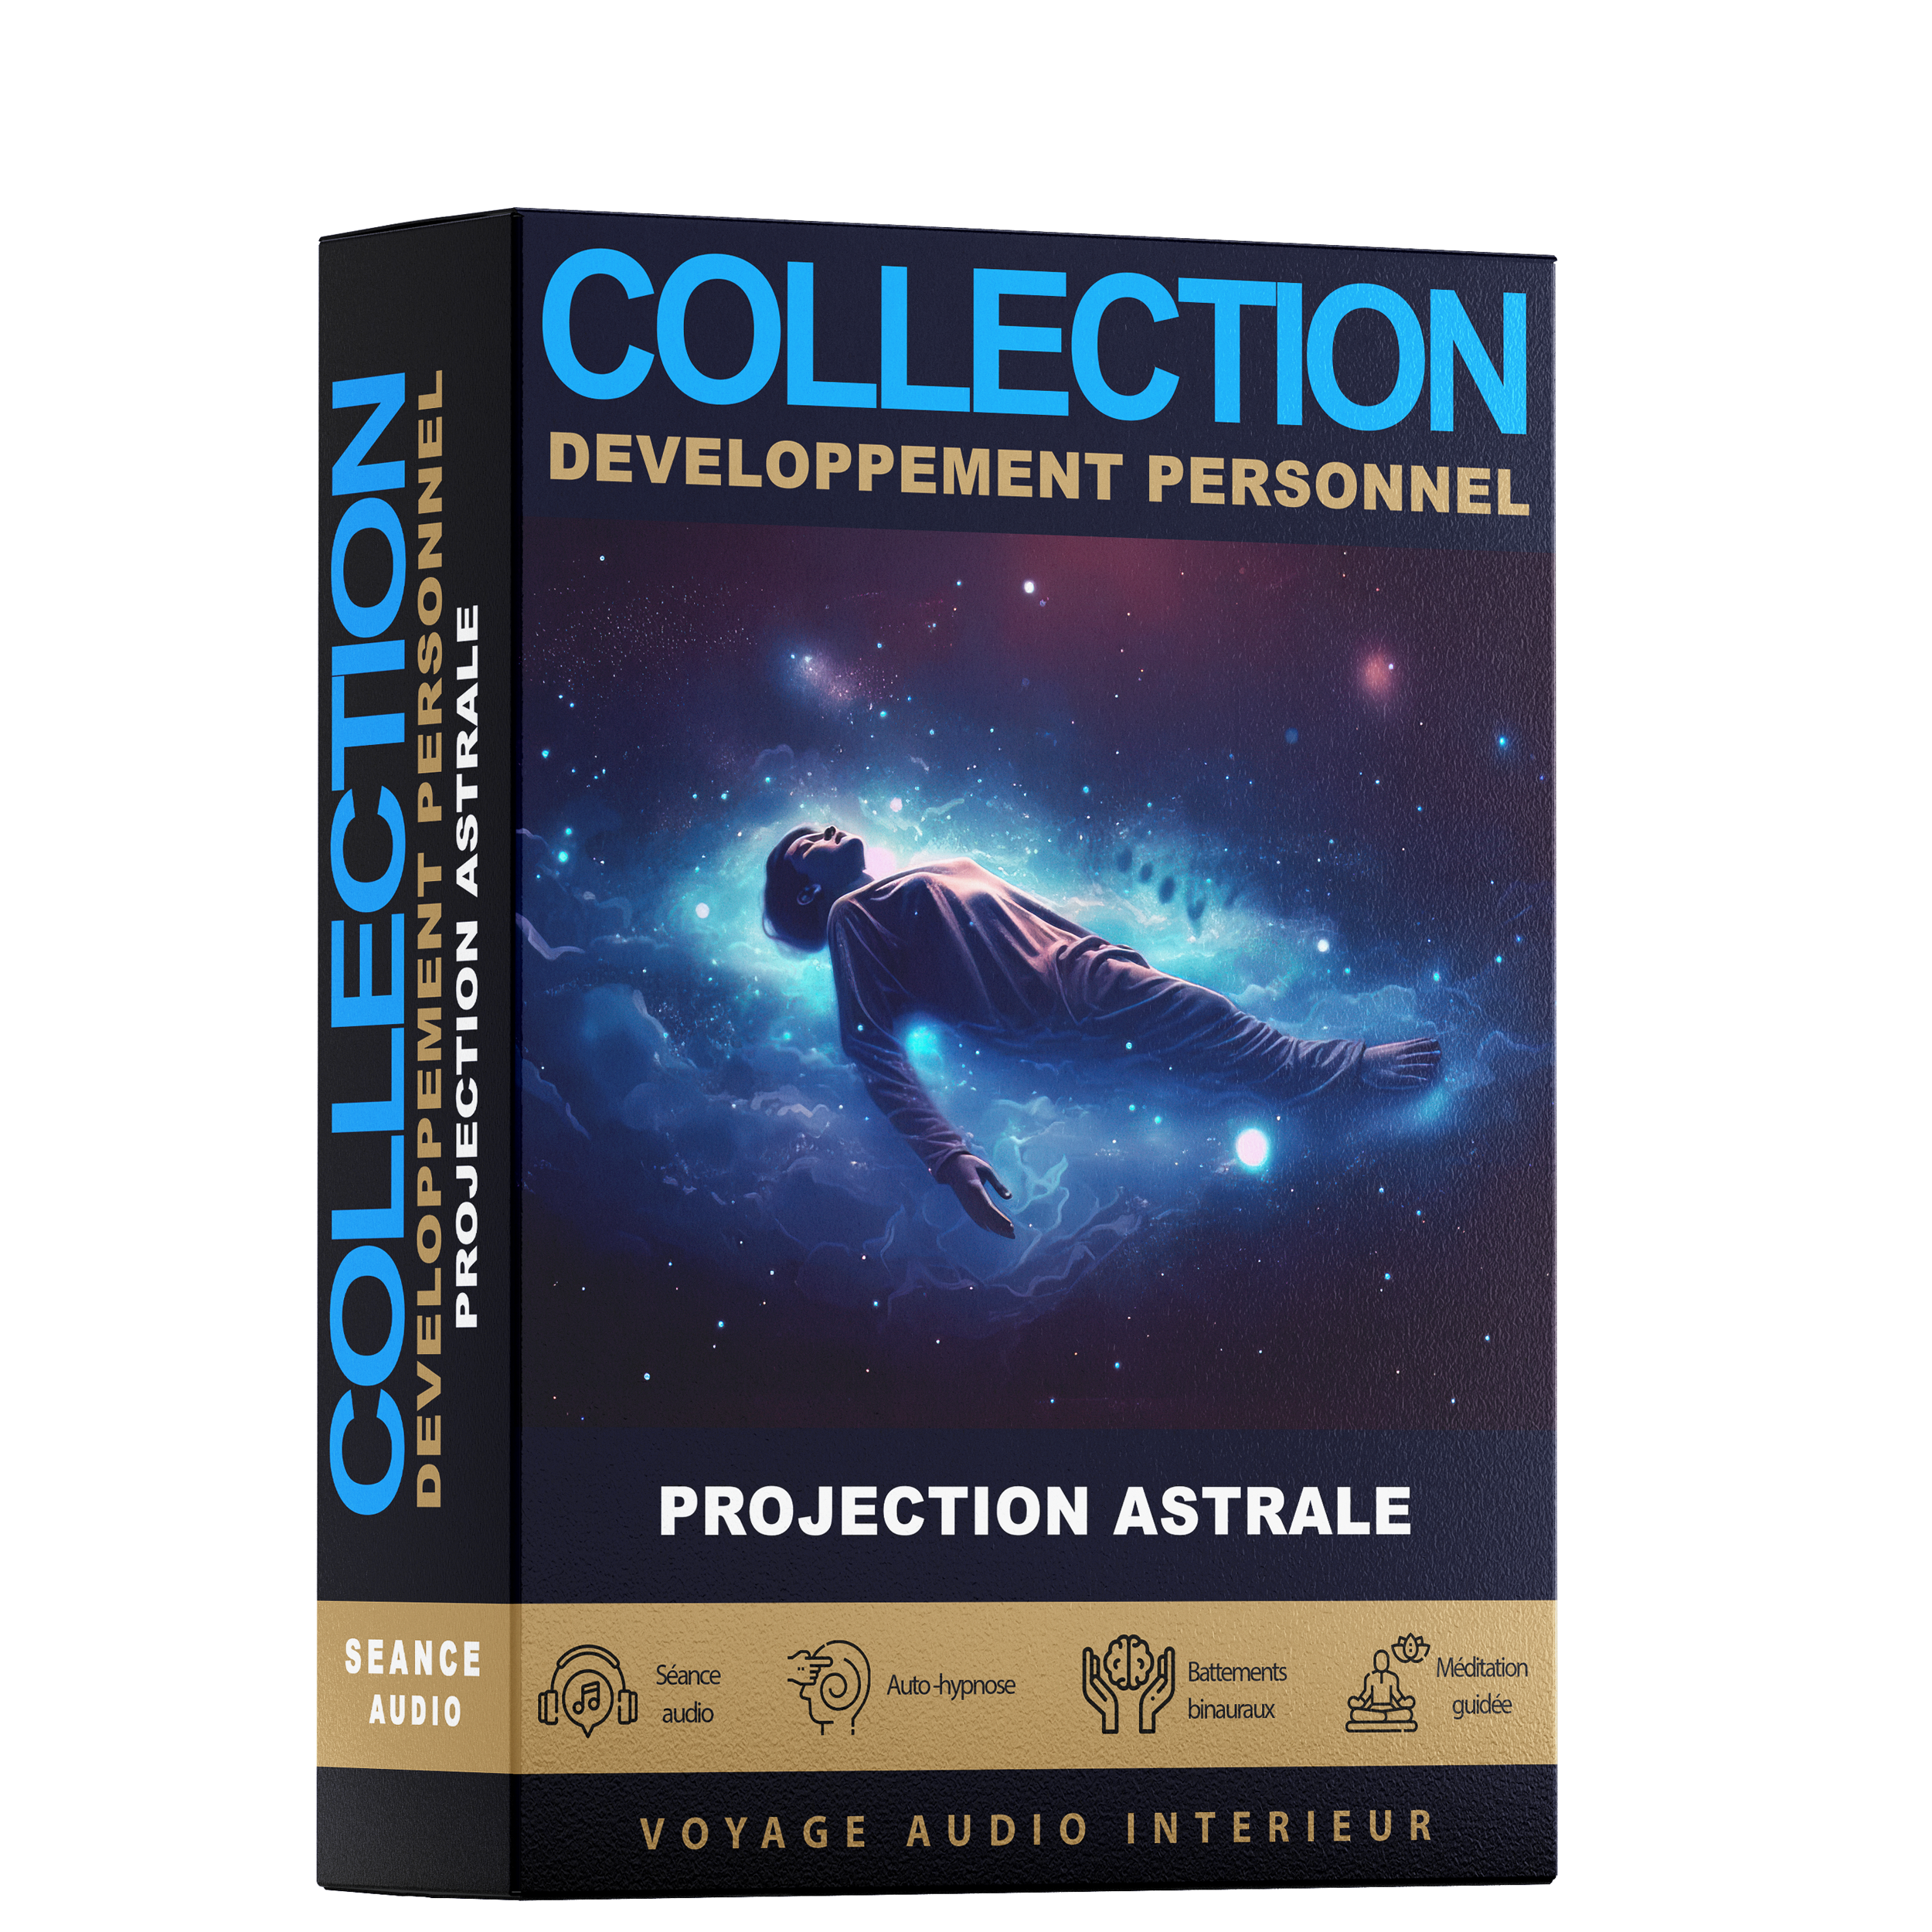 PROJECTION ASTRALE